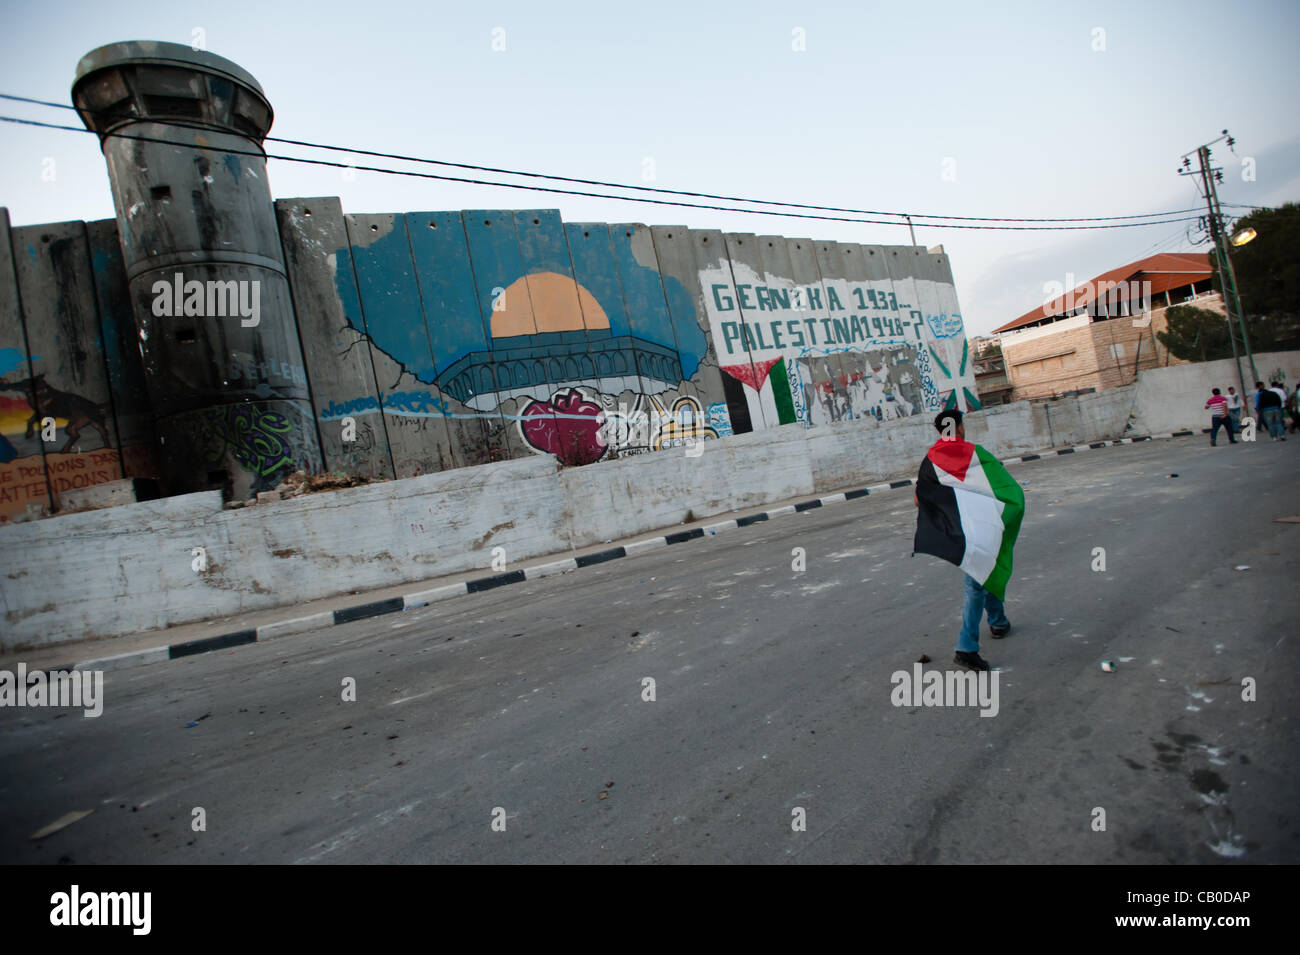 BETHLEHEM, PALESTINIAN TERRITORIES - MAY 14, 2012: A Palestinian wearing a flag marches past the Israeli separation wall in Aida Refugee Camp on the eve of Nakba Day, commemorating the "catastrophe" that expelled Palestinian refugees from what became the modern state of Israel in 1948. Stock Photo